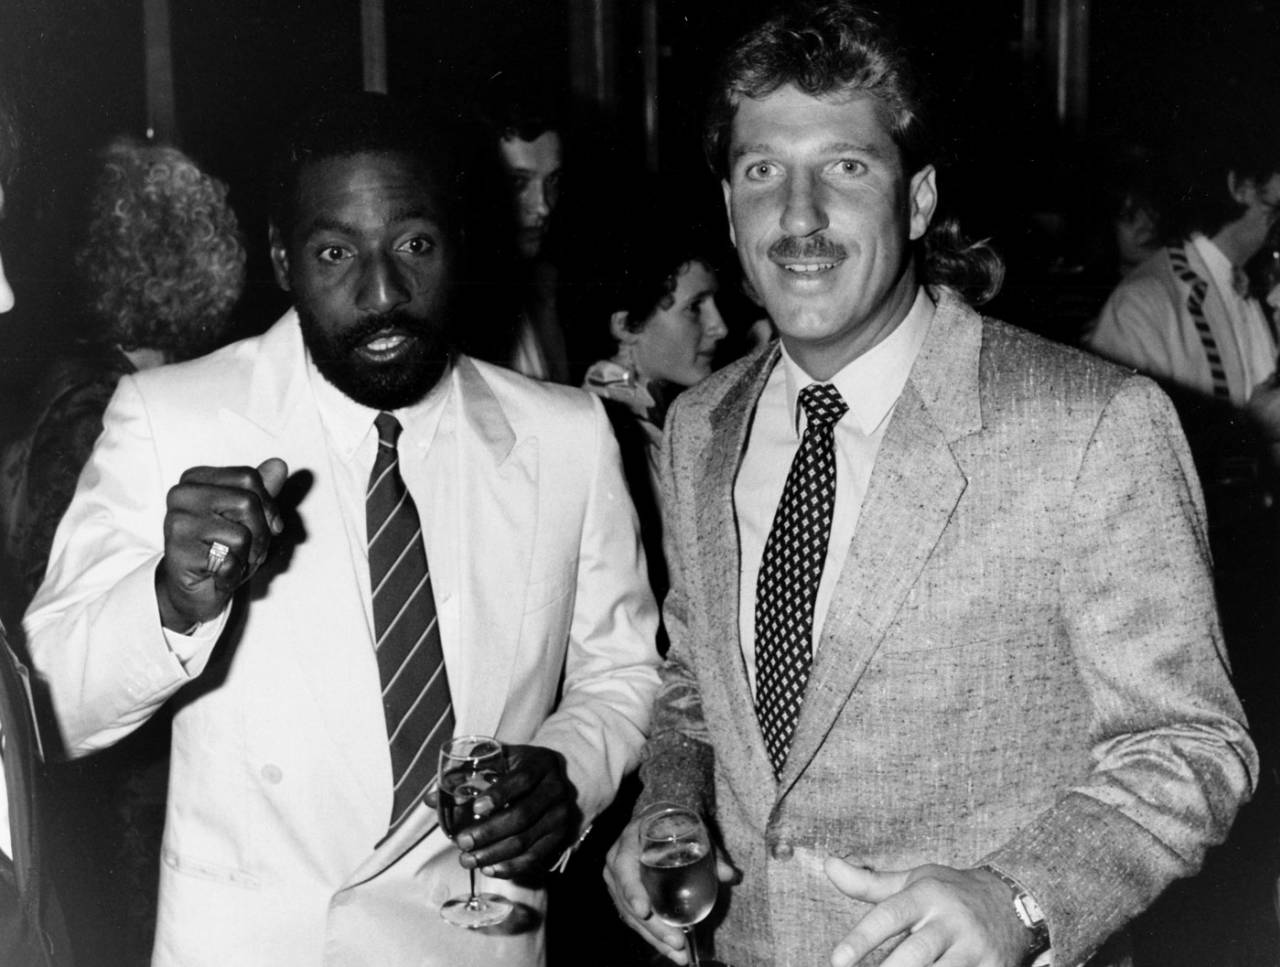 Viv Richards and Ian Botham attend a party, May 30, 1986